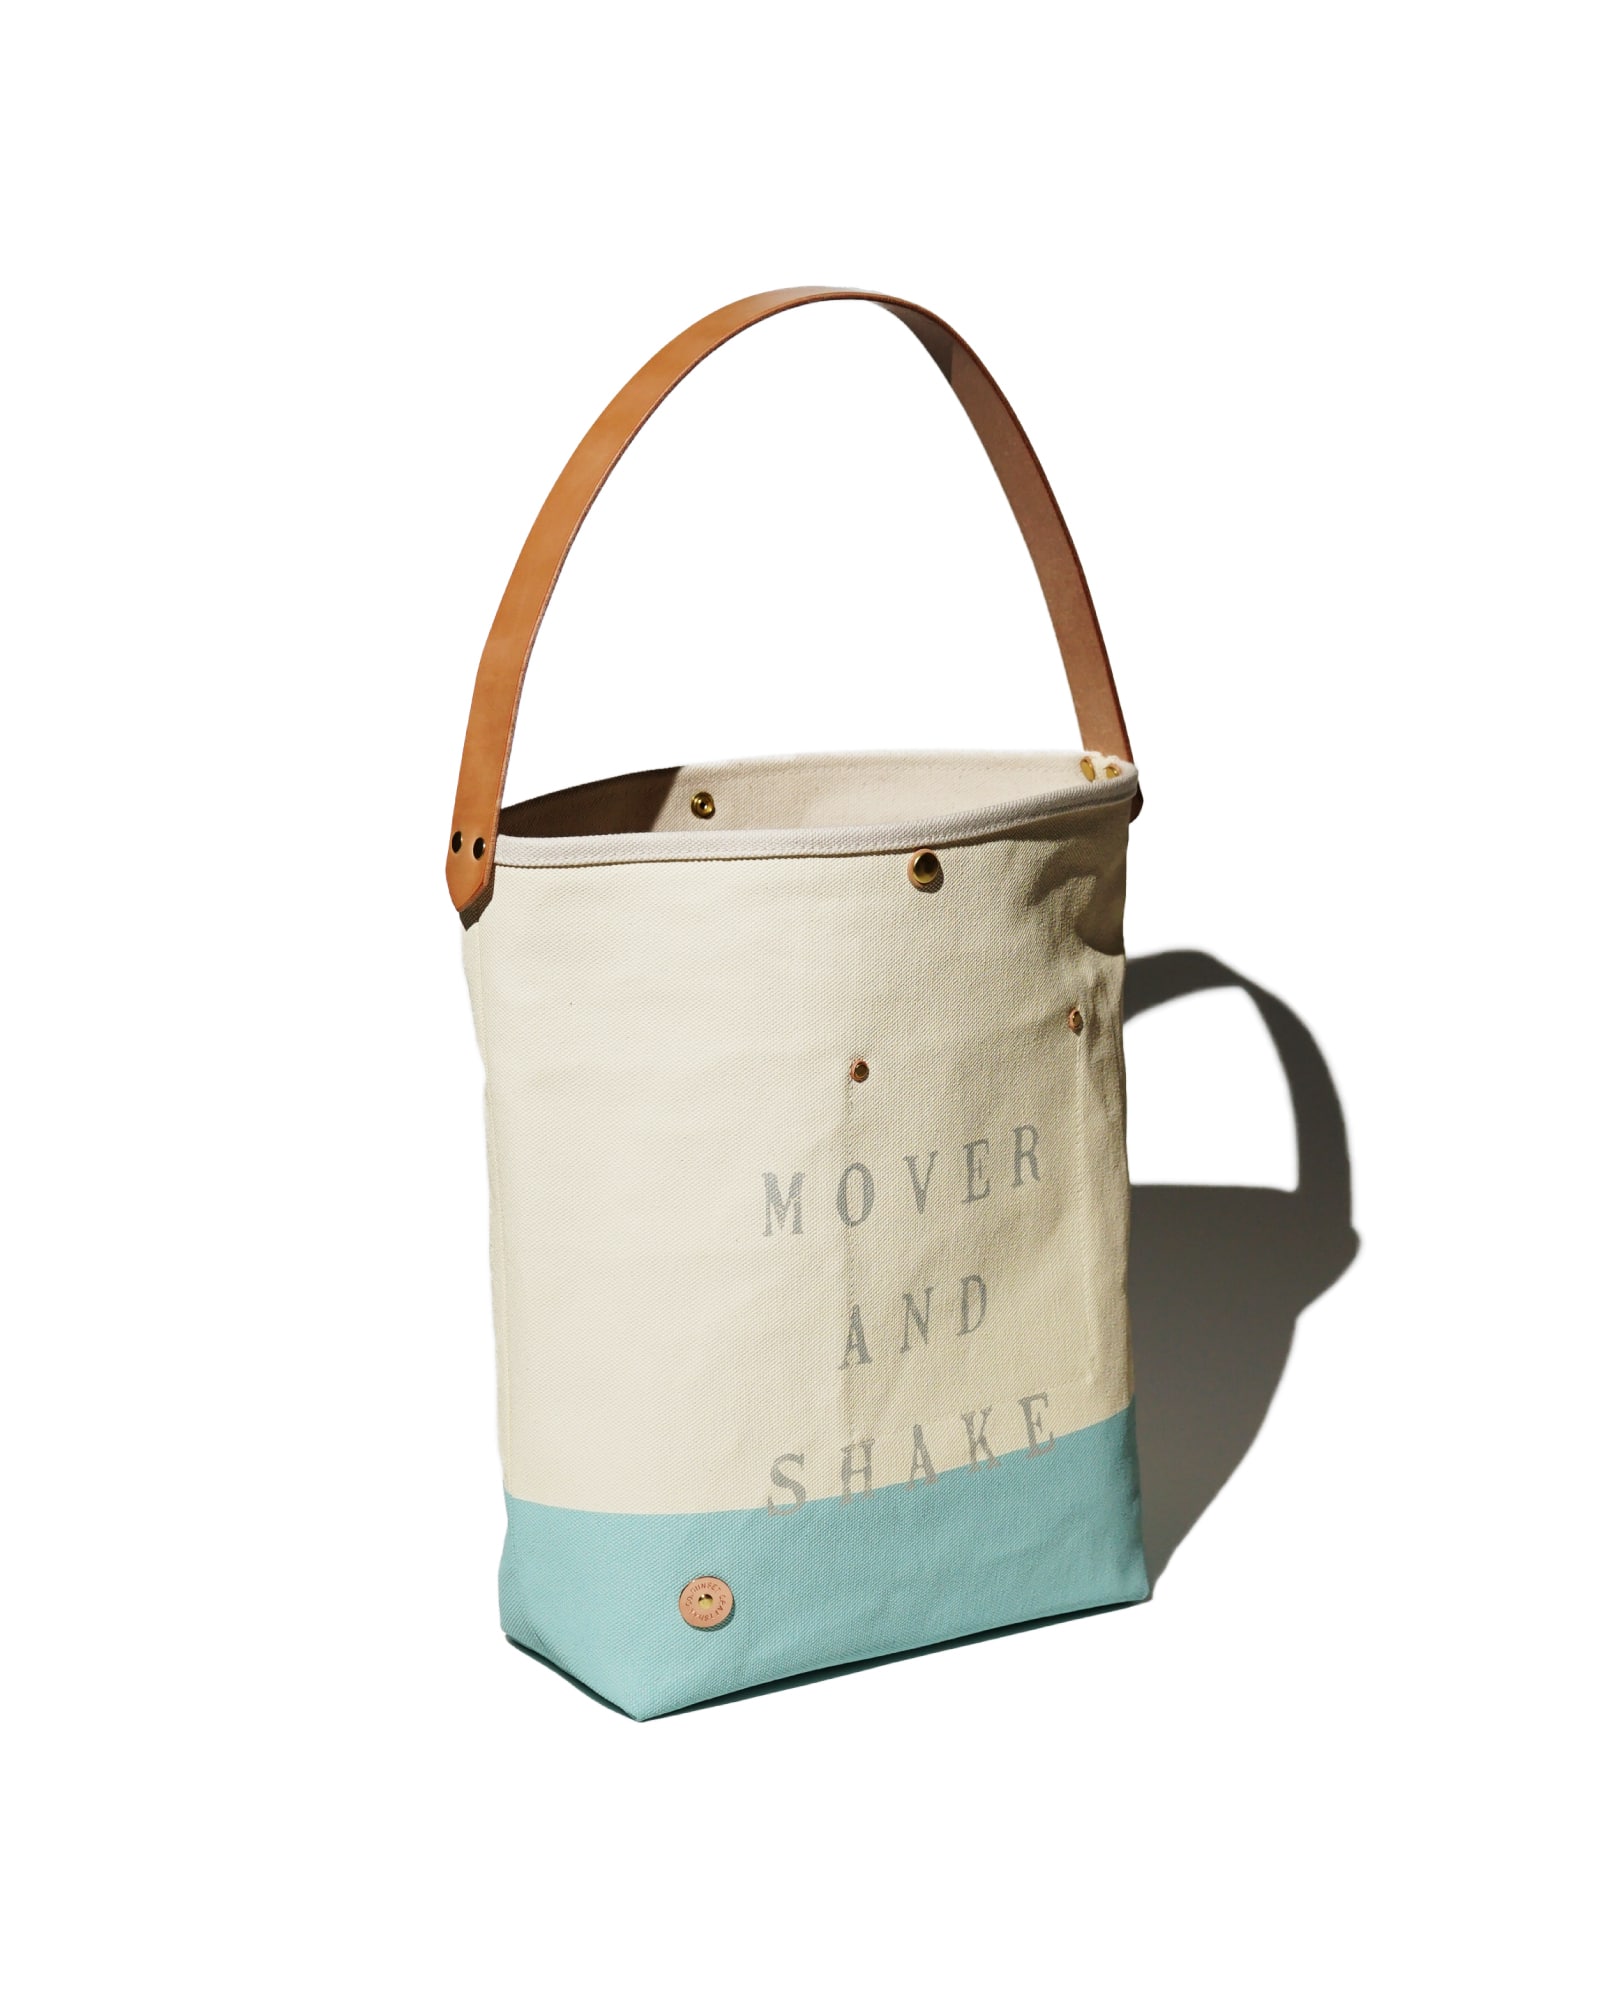 Sunset Craftsman Co. / One Handle Tote Bag (M) | Mover & Shake